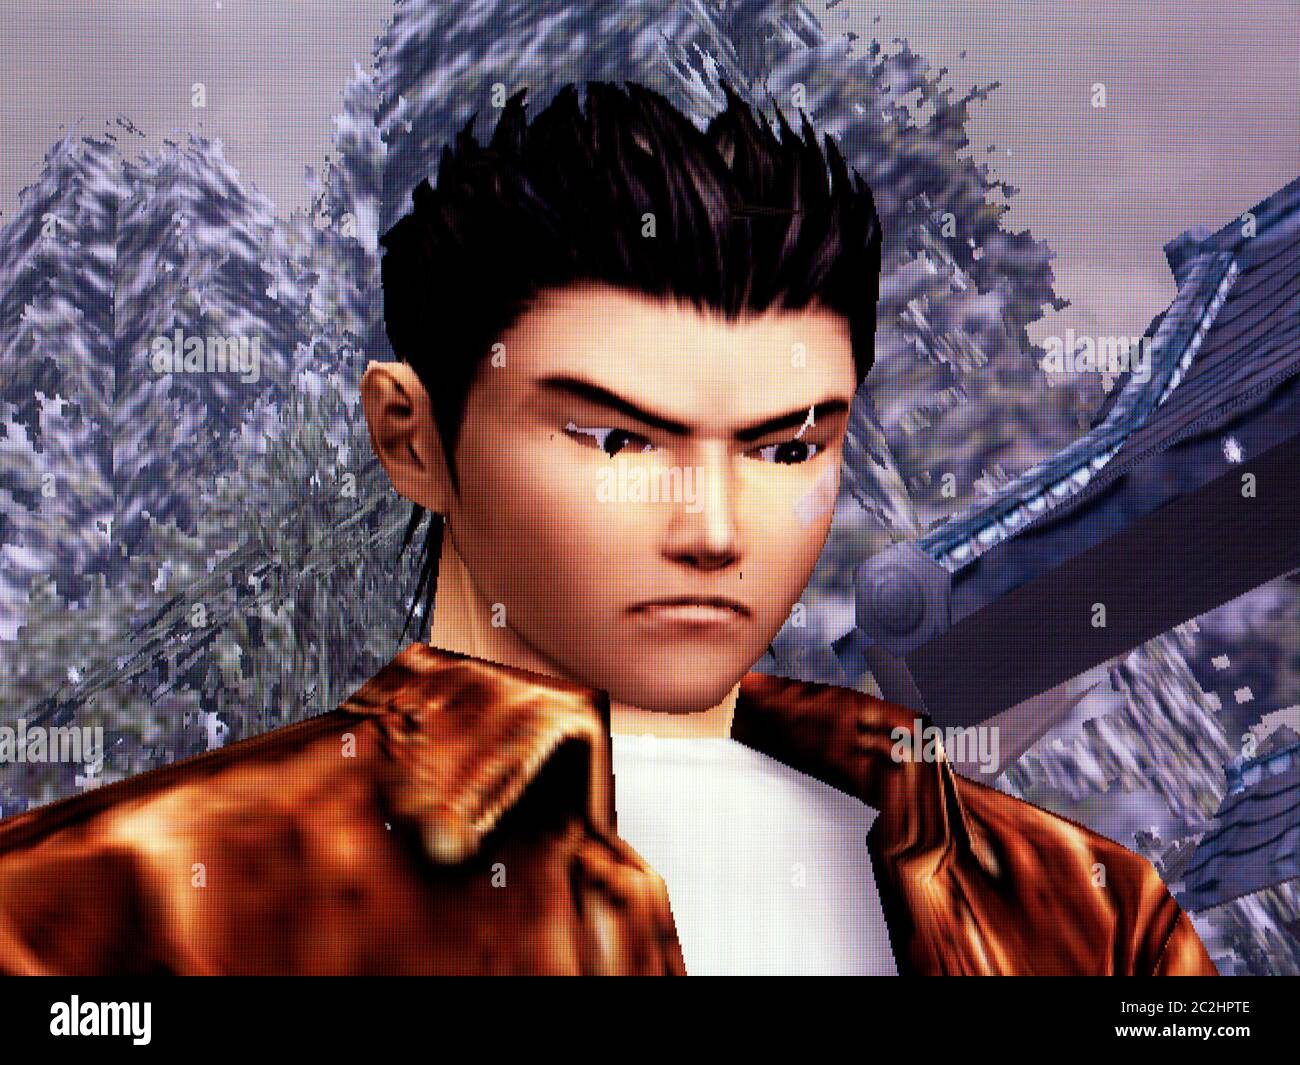 Shenmue - Sega Dreamcast Videogame - Editorial use only Stock Photo